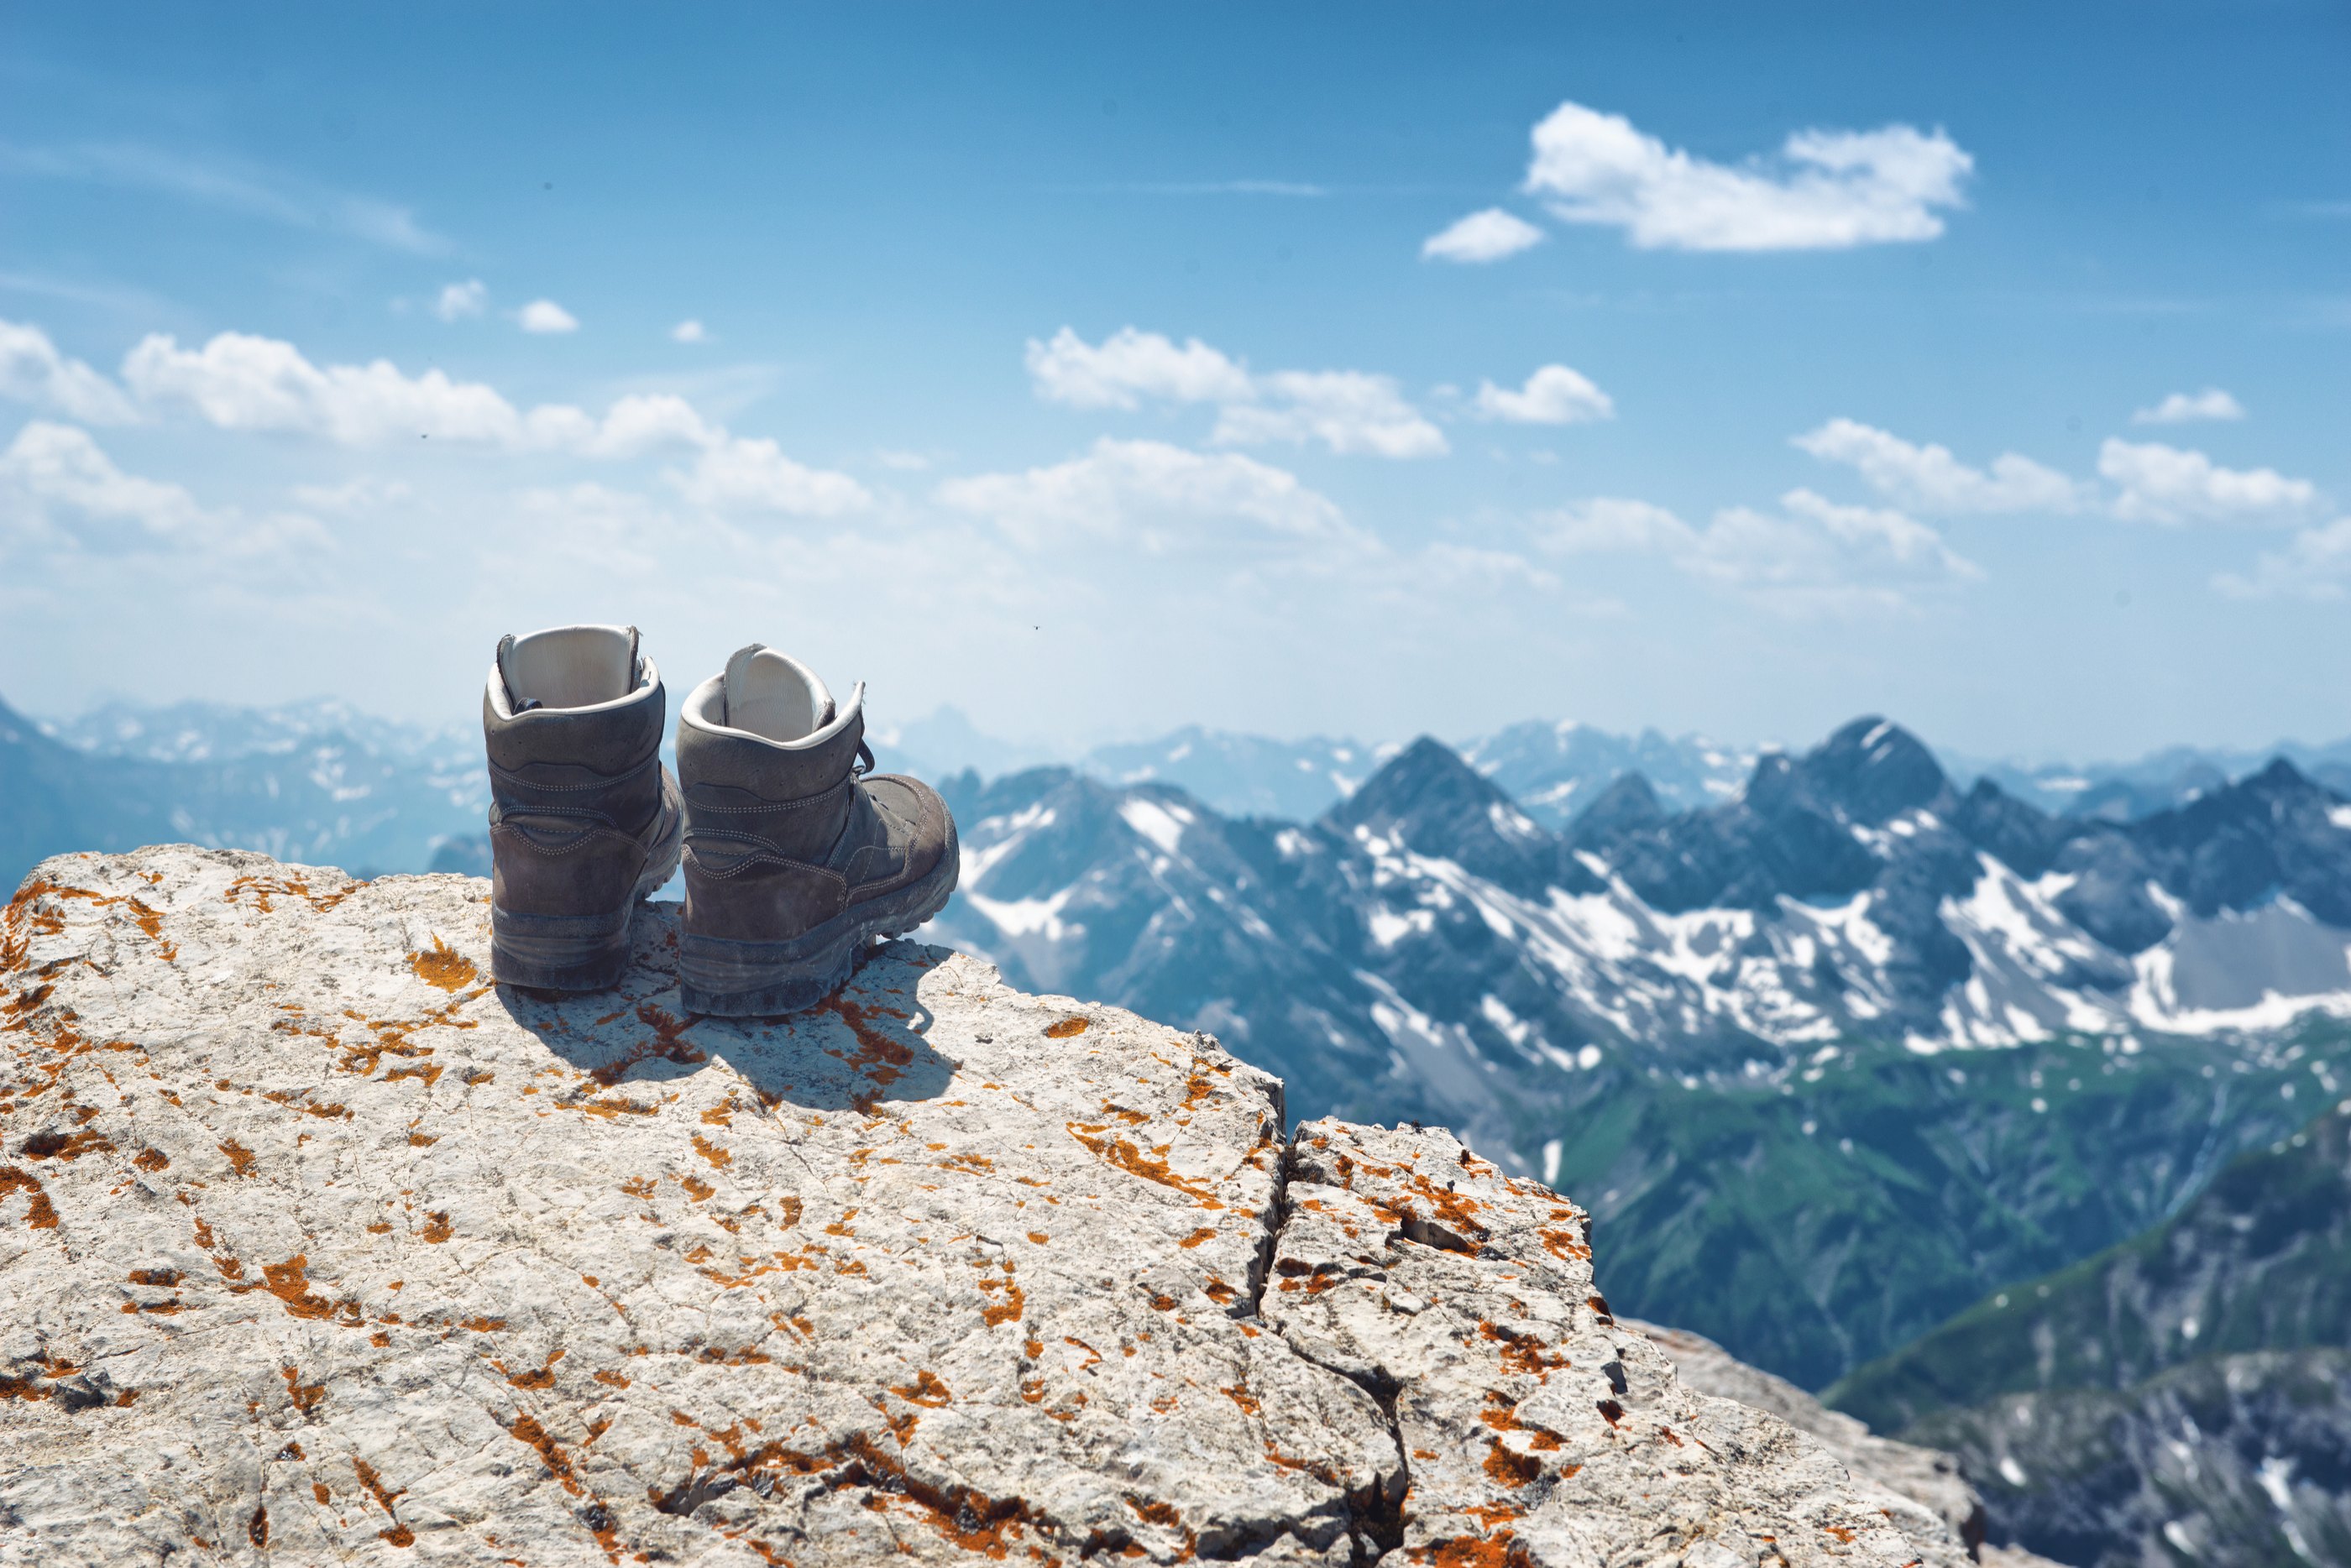 Pair of hiking boots on an alpine summit balanced on the edge of a rocky cliff overlooking distant alps with scattered snow on a sunny summer day, Hochvogel, Germany